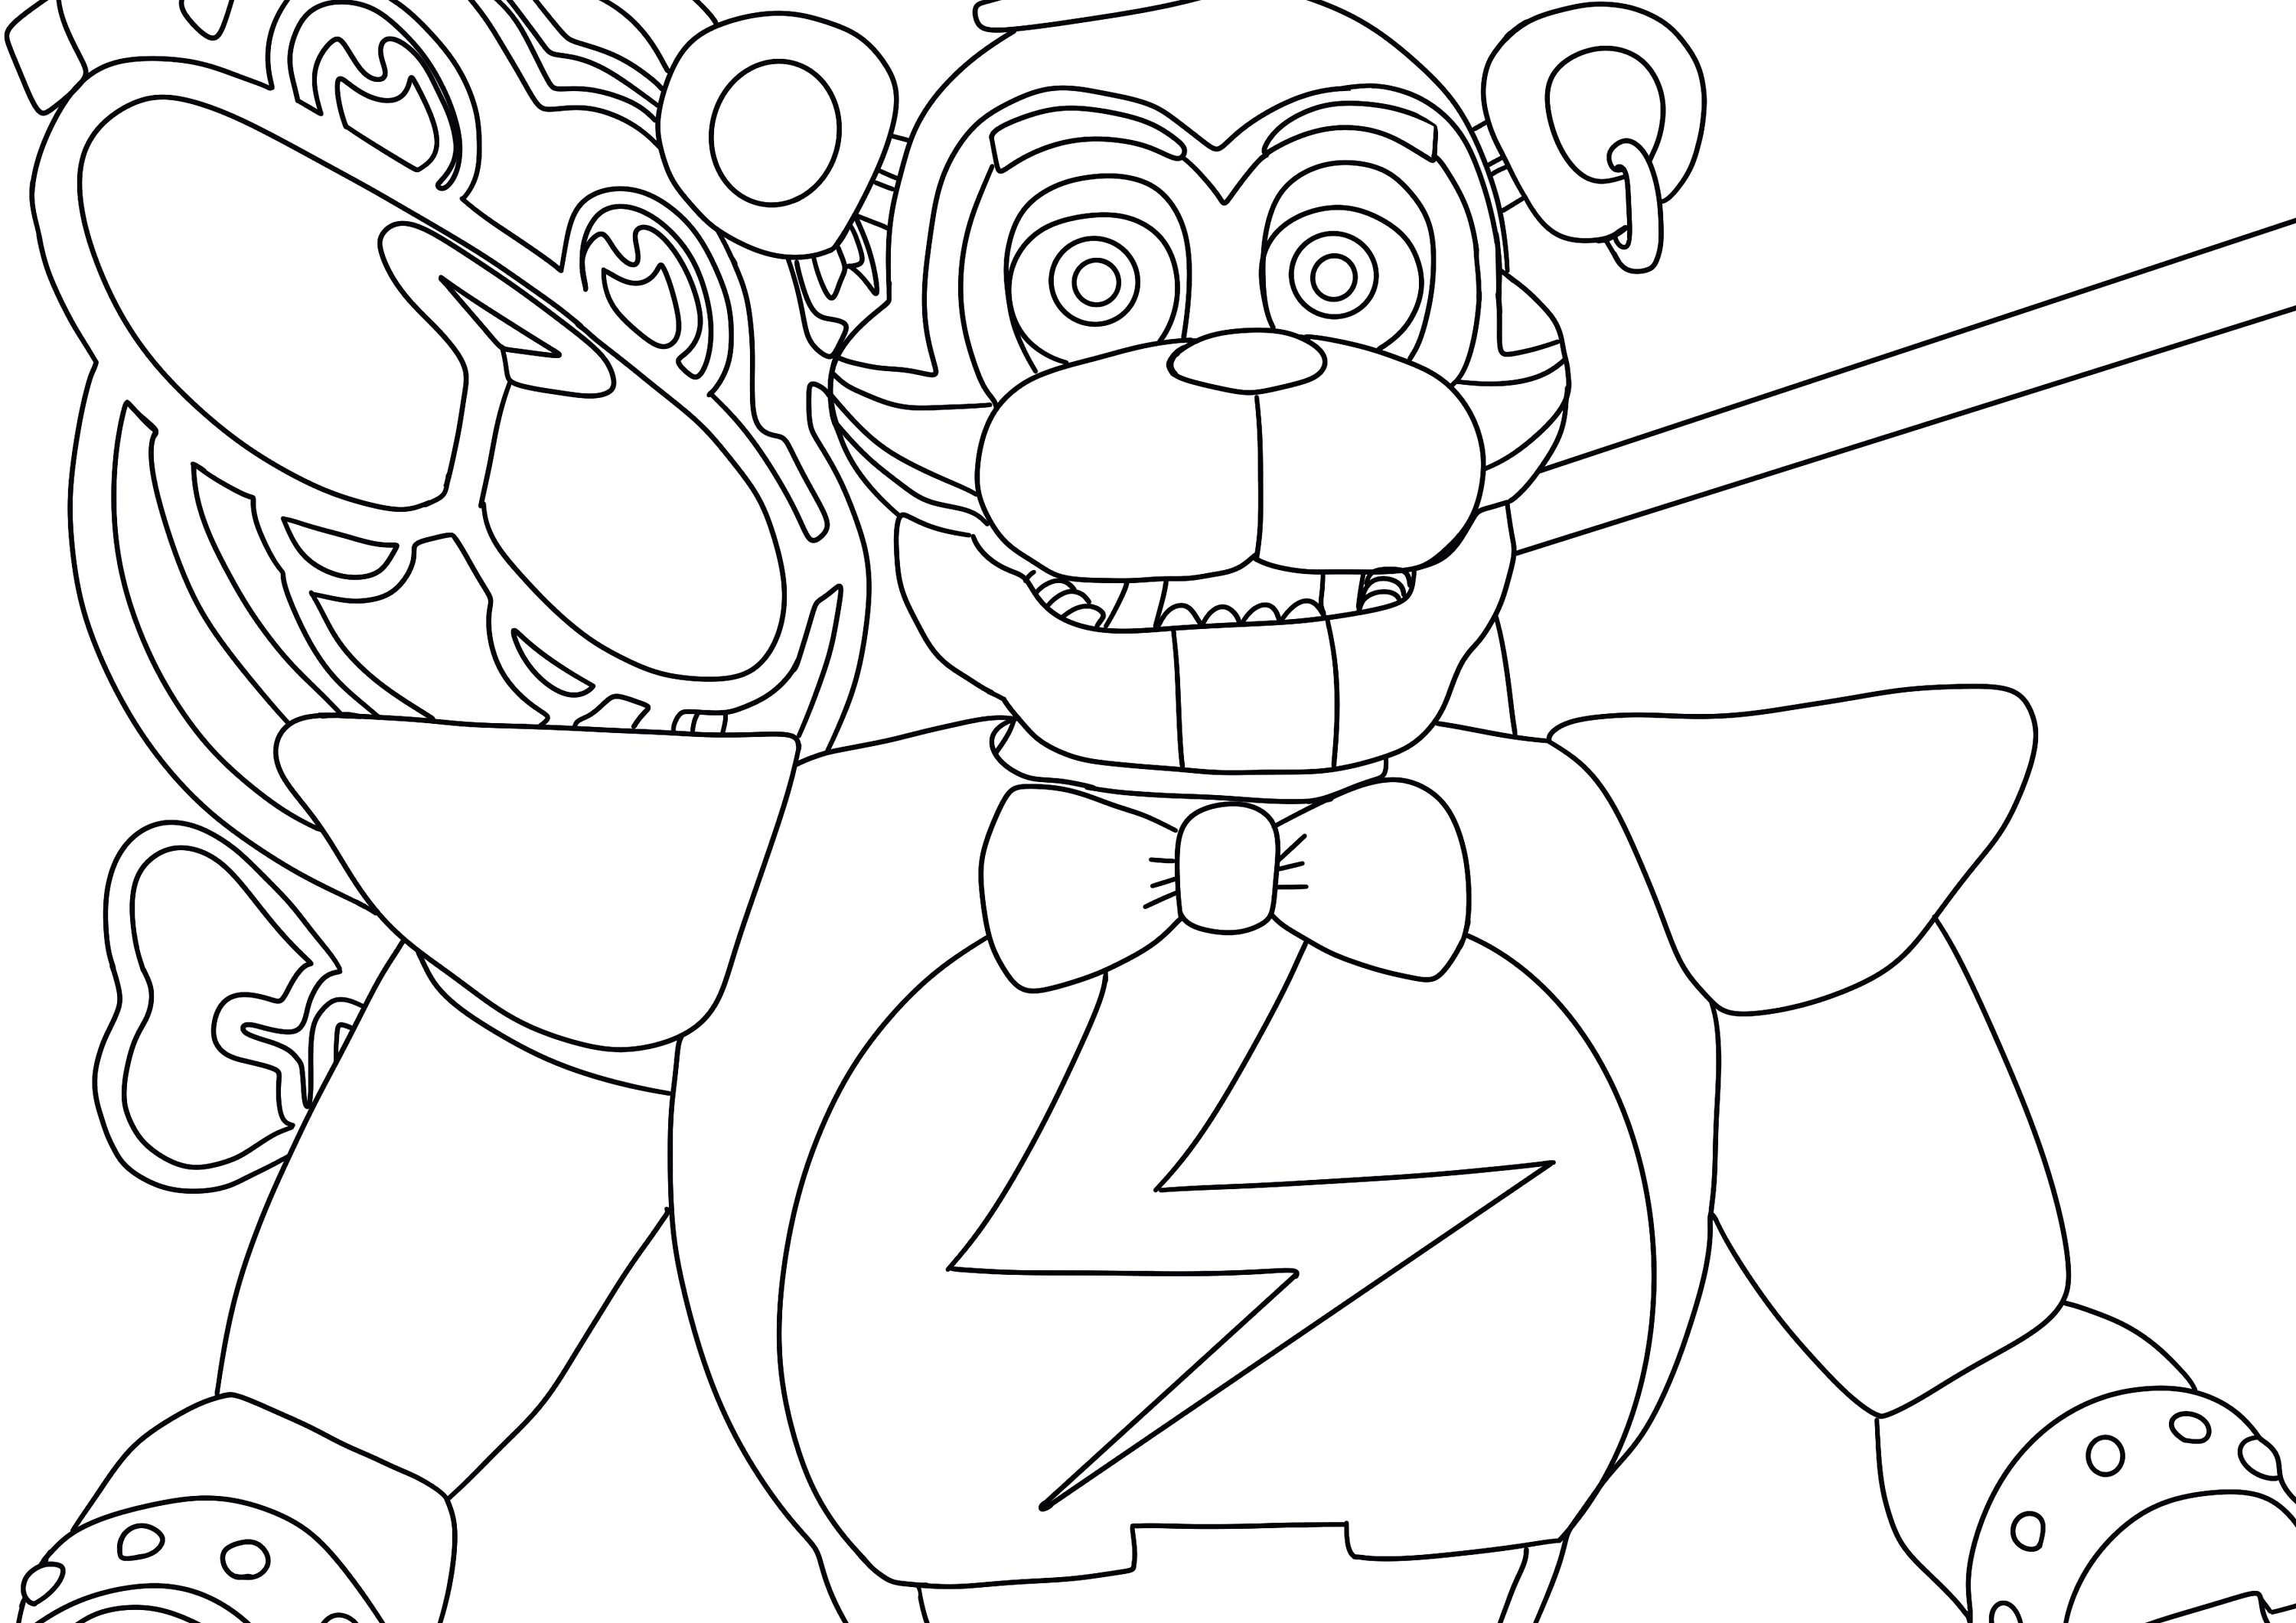 A4 Digital Downloadable Adult Colouring Page Five Nights at Freddys Freddy  Fasbear Security Breach - Etsy